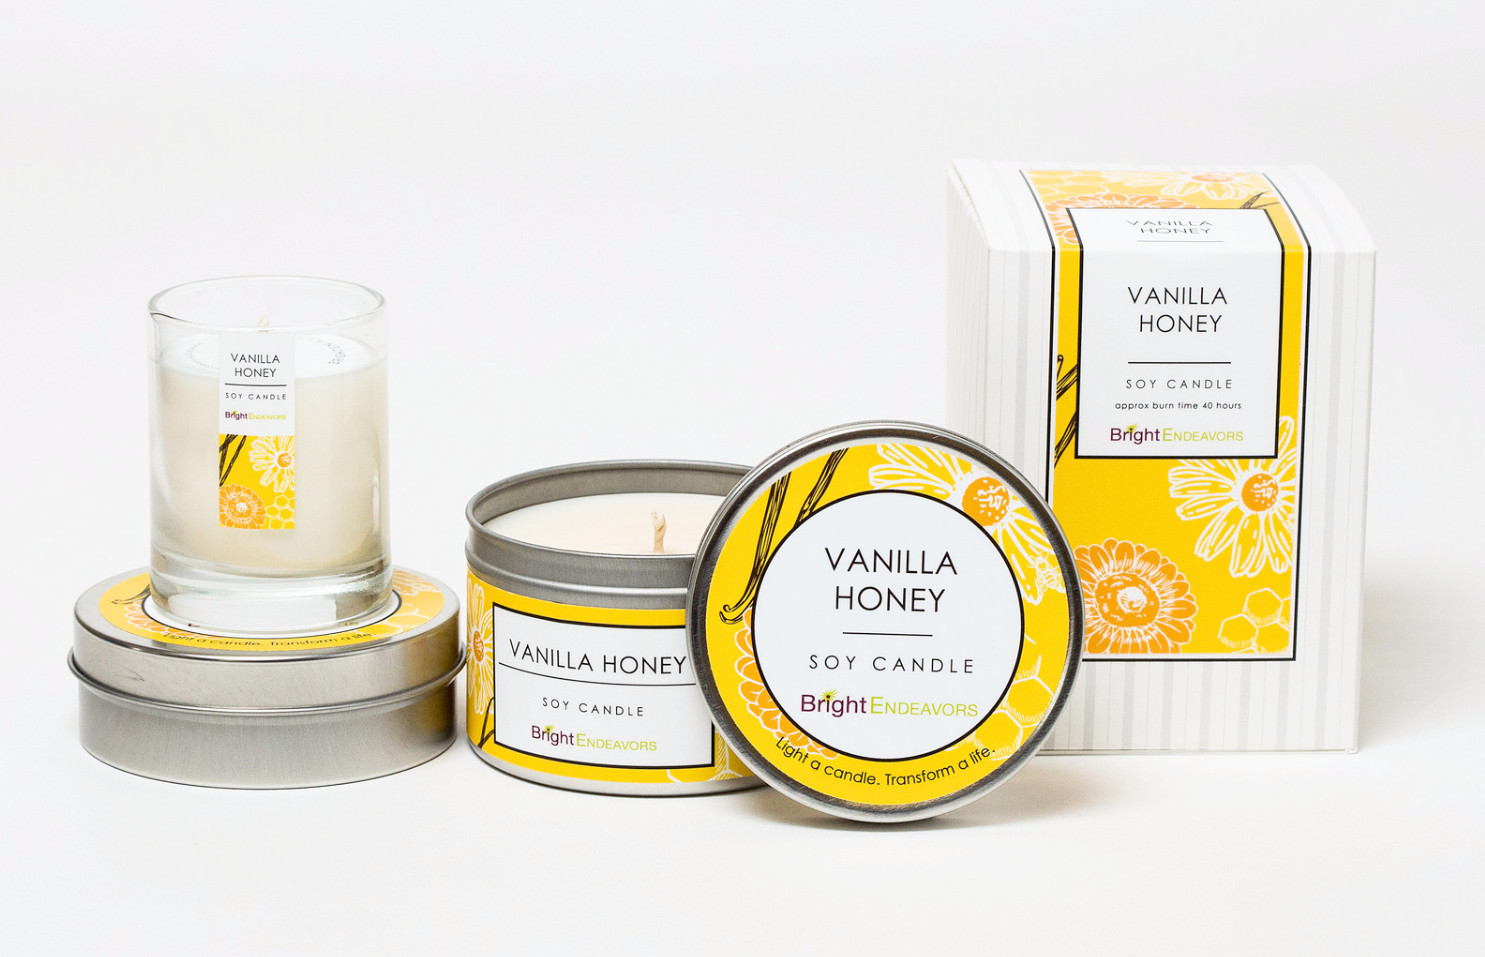 Light A Candle, Transform A Life With The Vanilla Honey Gift Set